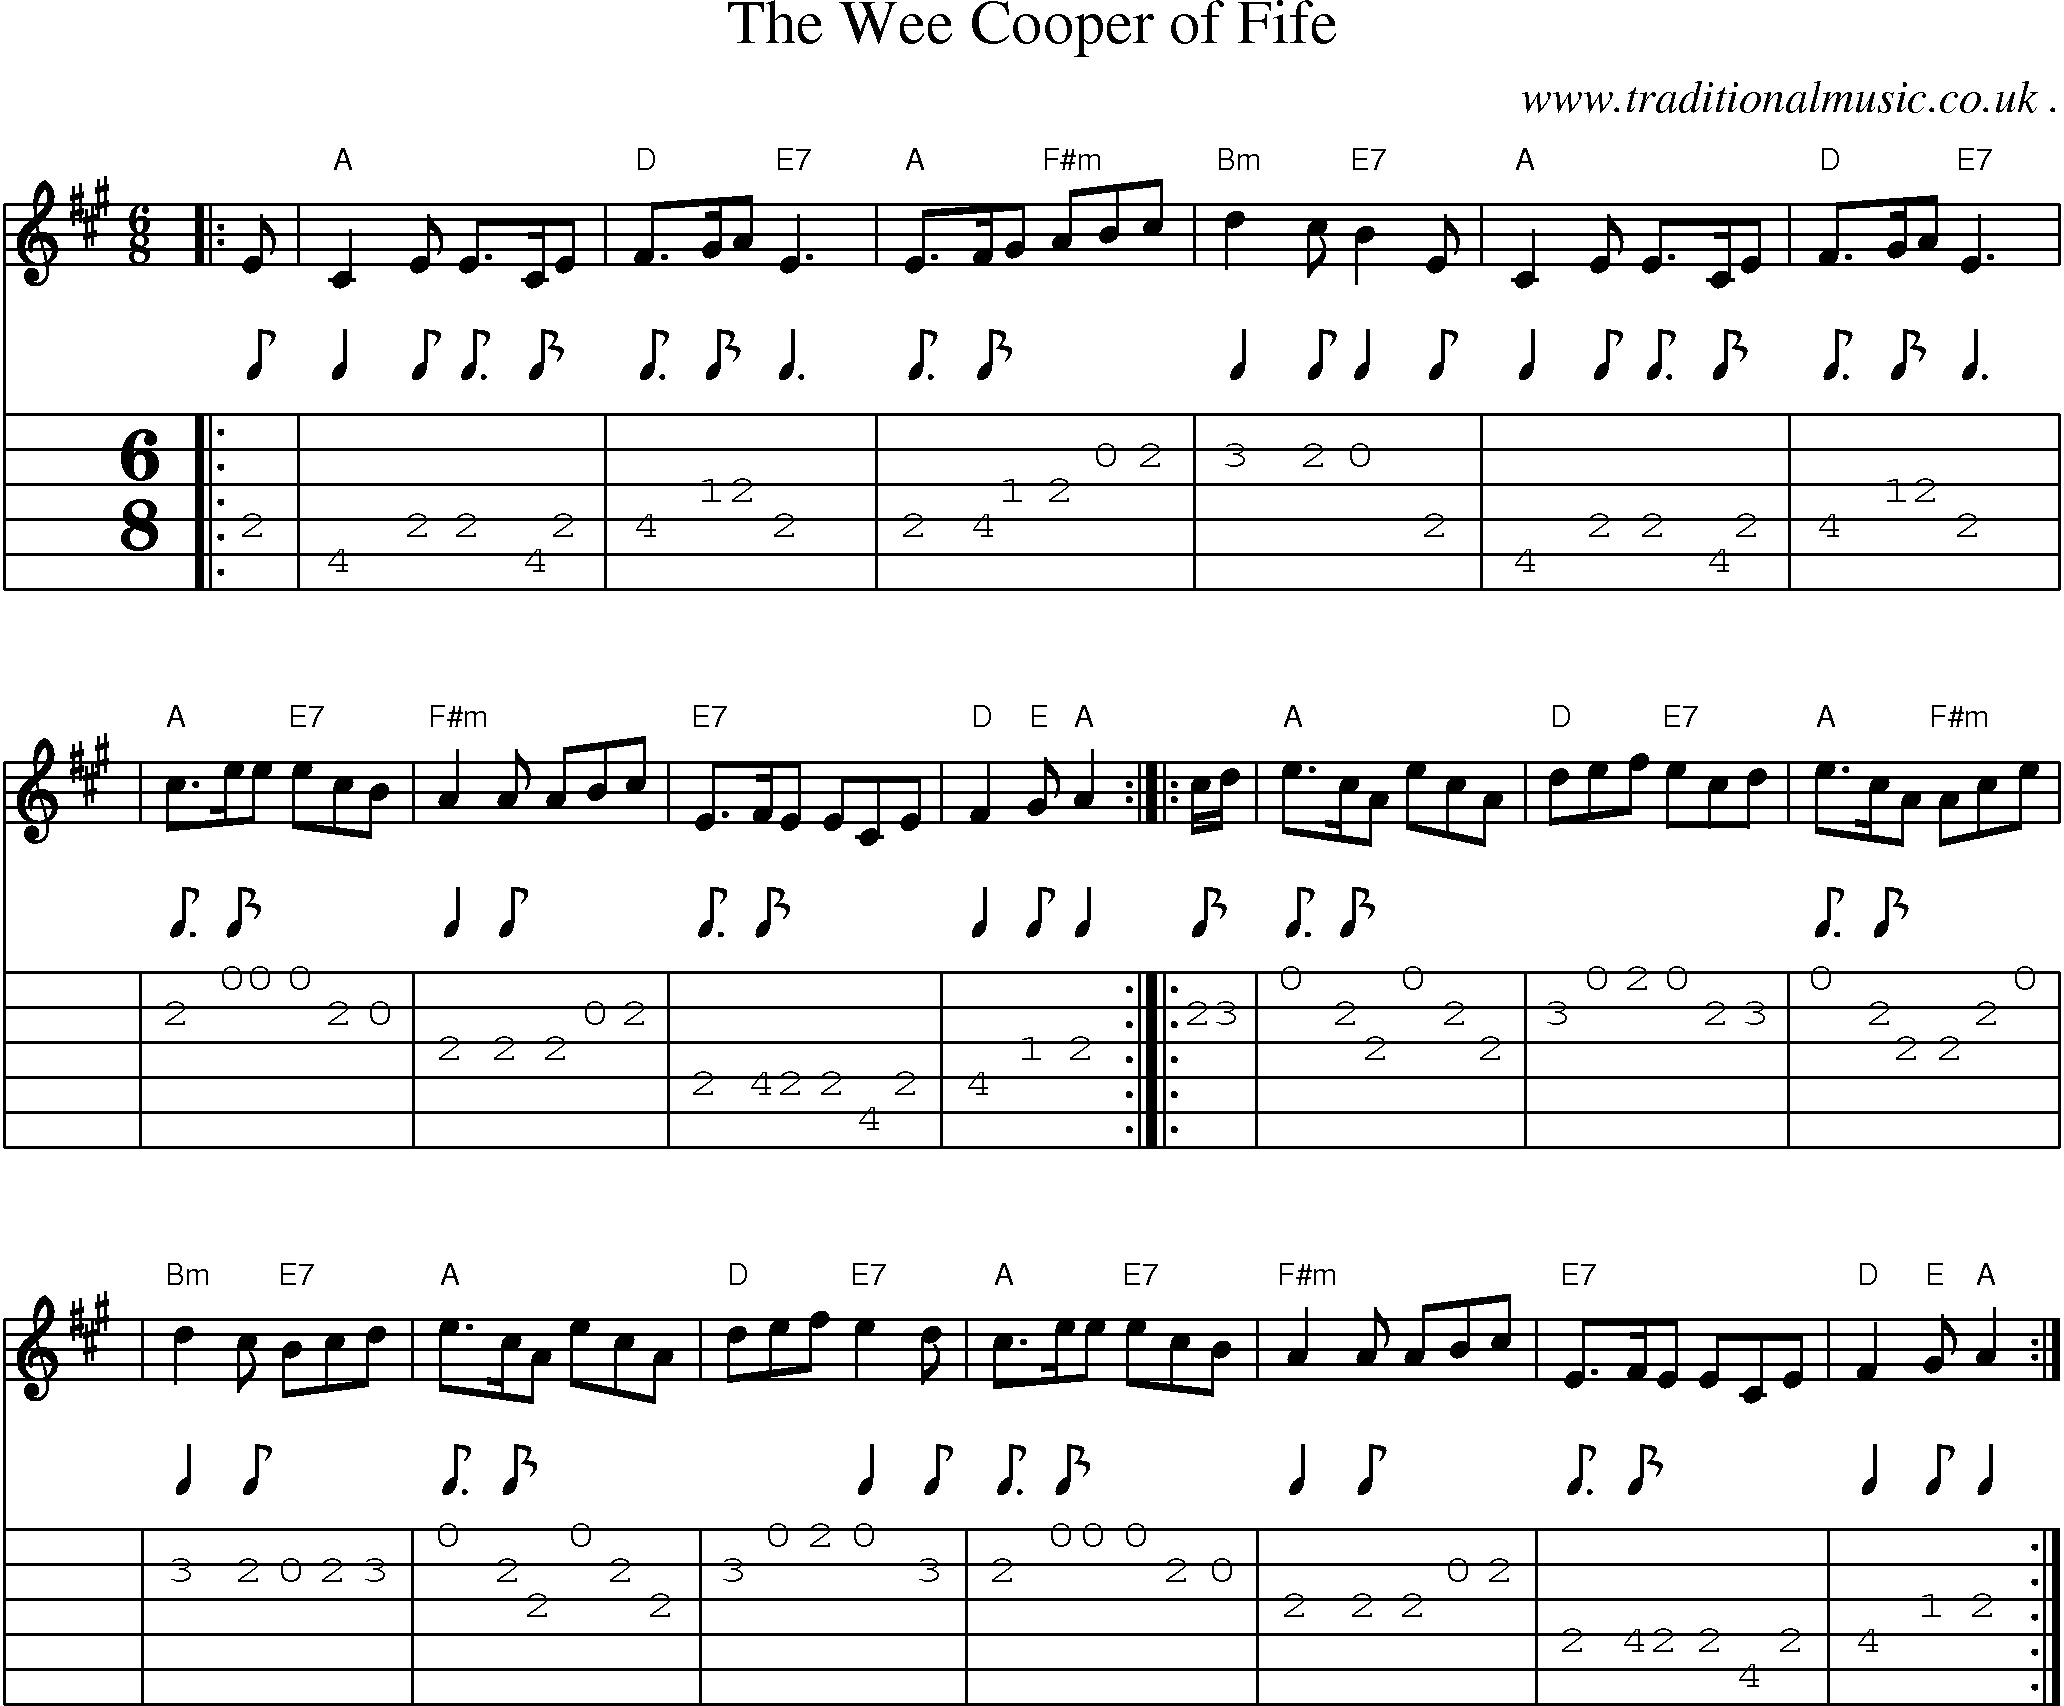 Sheet-music  score, Chords and Guitar Tabs for The Wee Cooper Of Fife